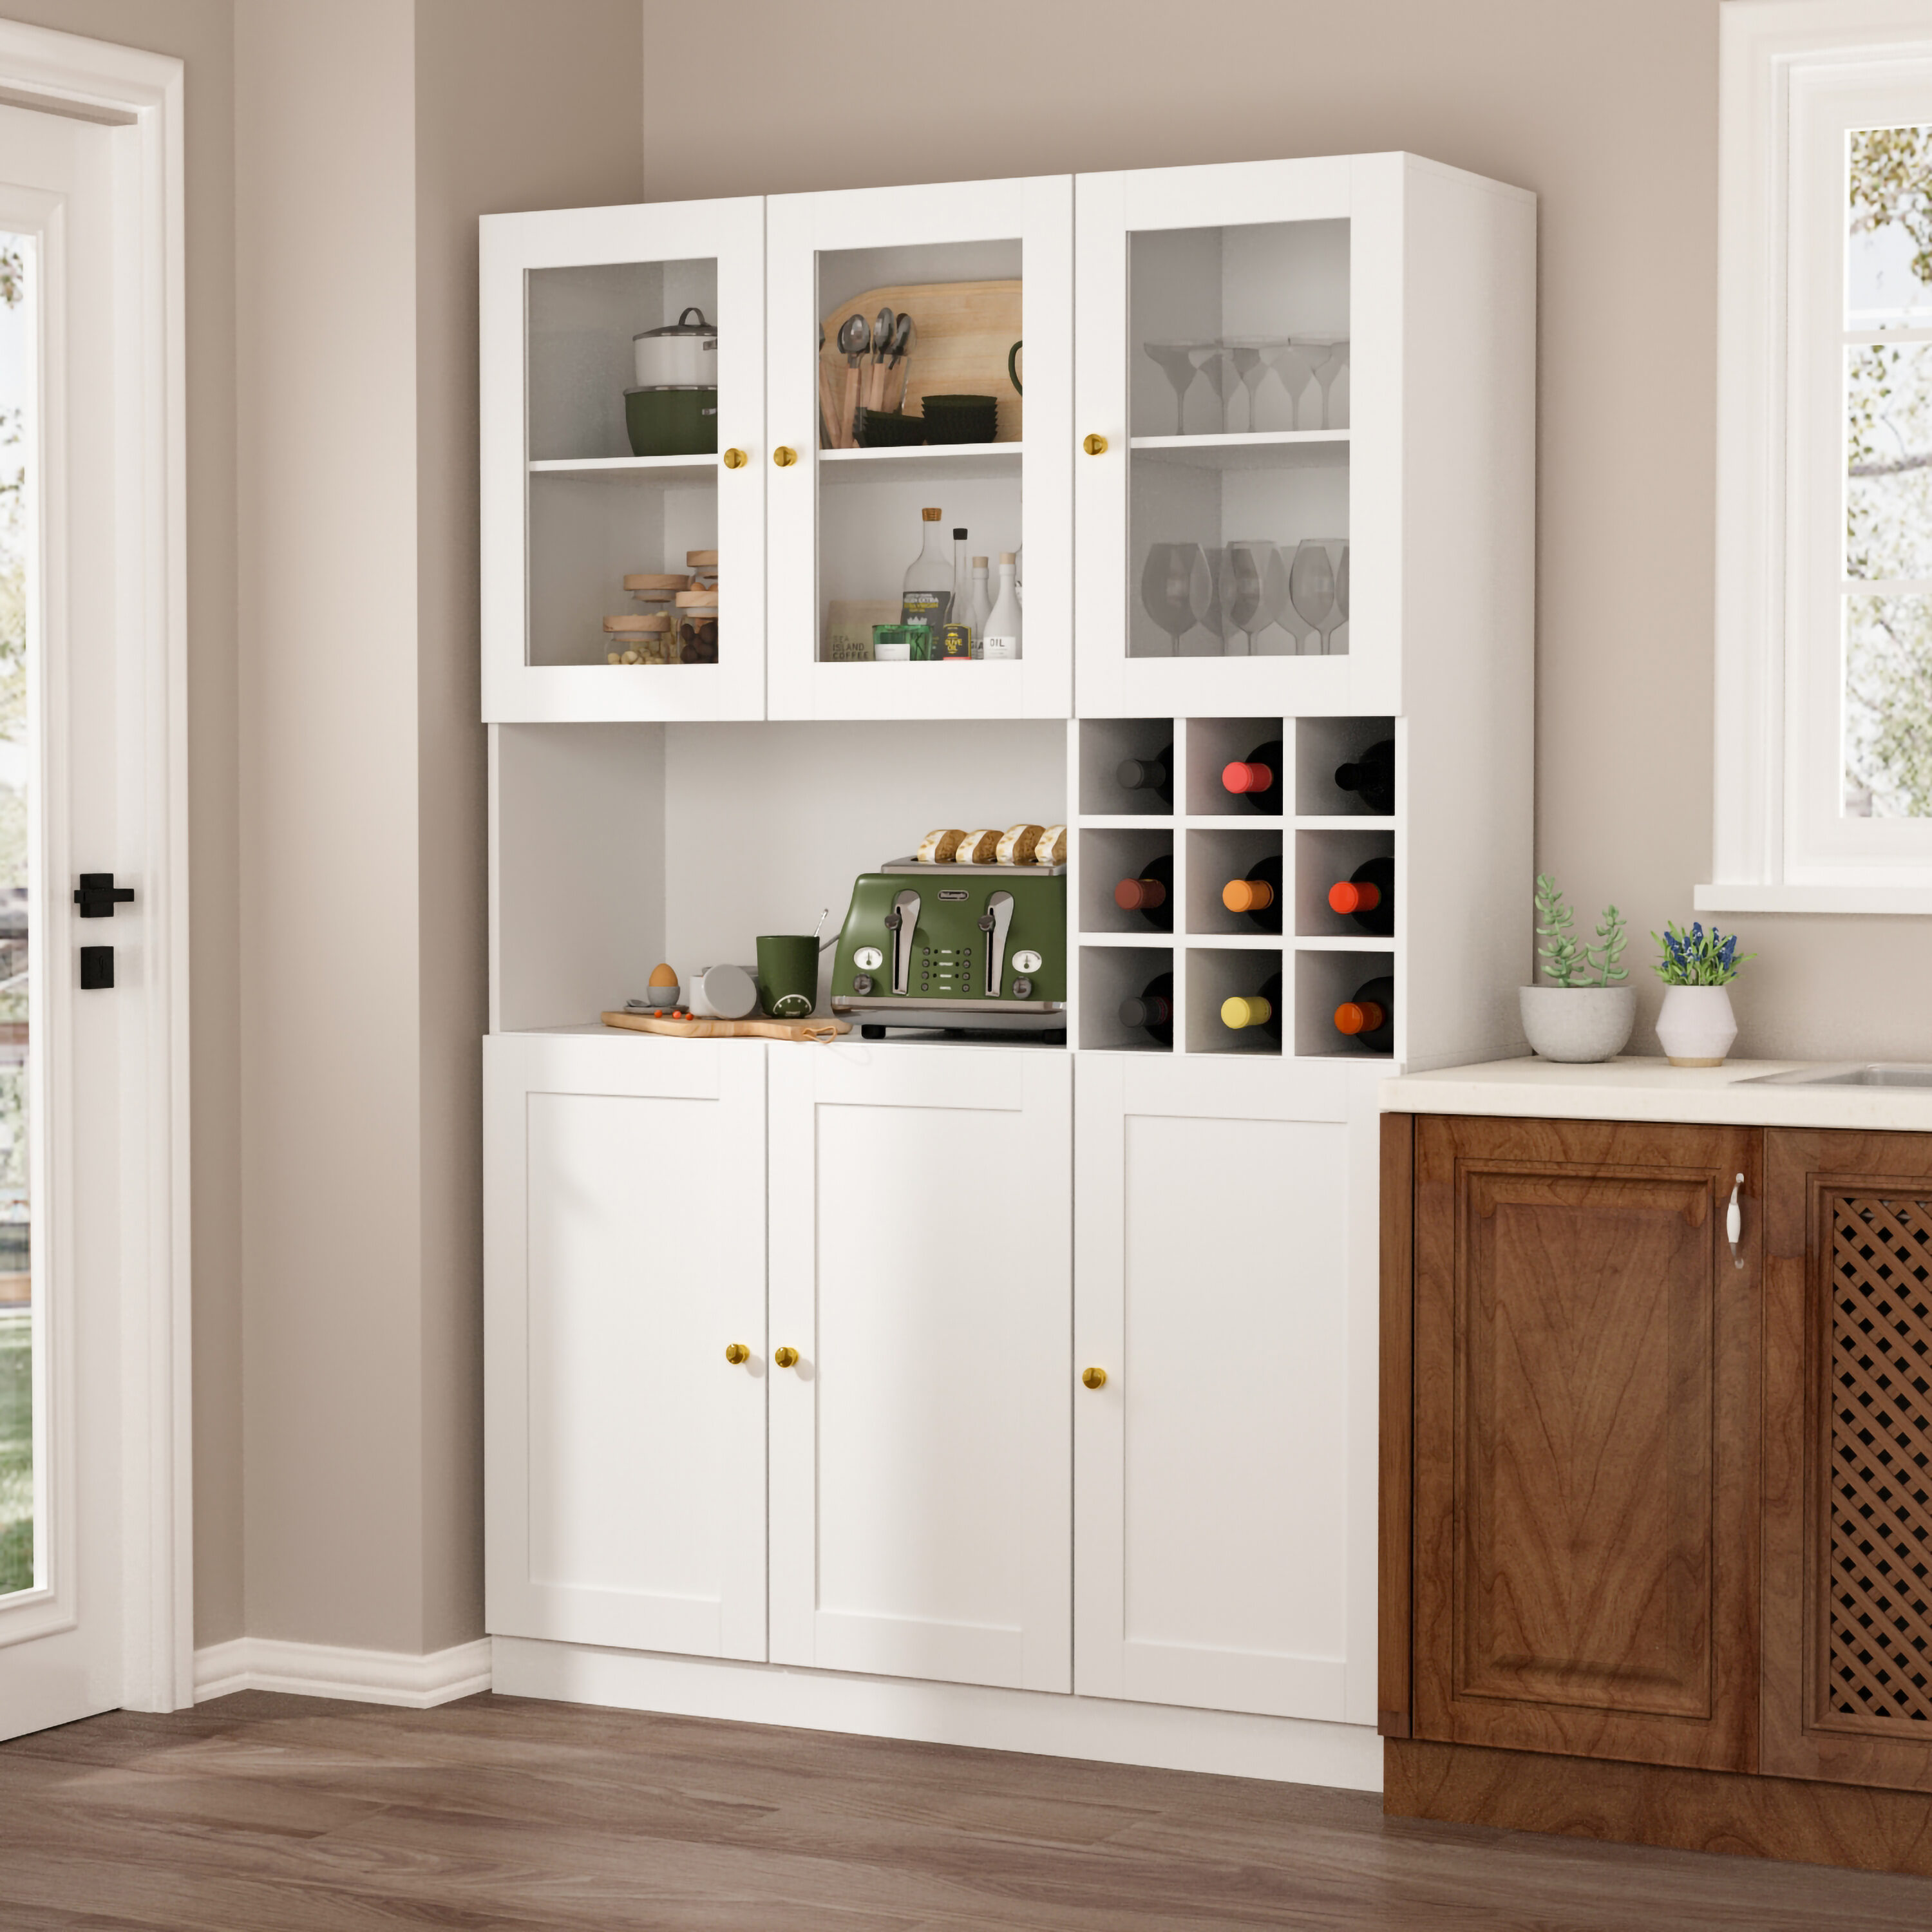 Fufu A 6 Door Kitchen Pantry Cabinet Storage Hutch With Microwave Stand In White Ljy Kf020261 01 02